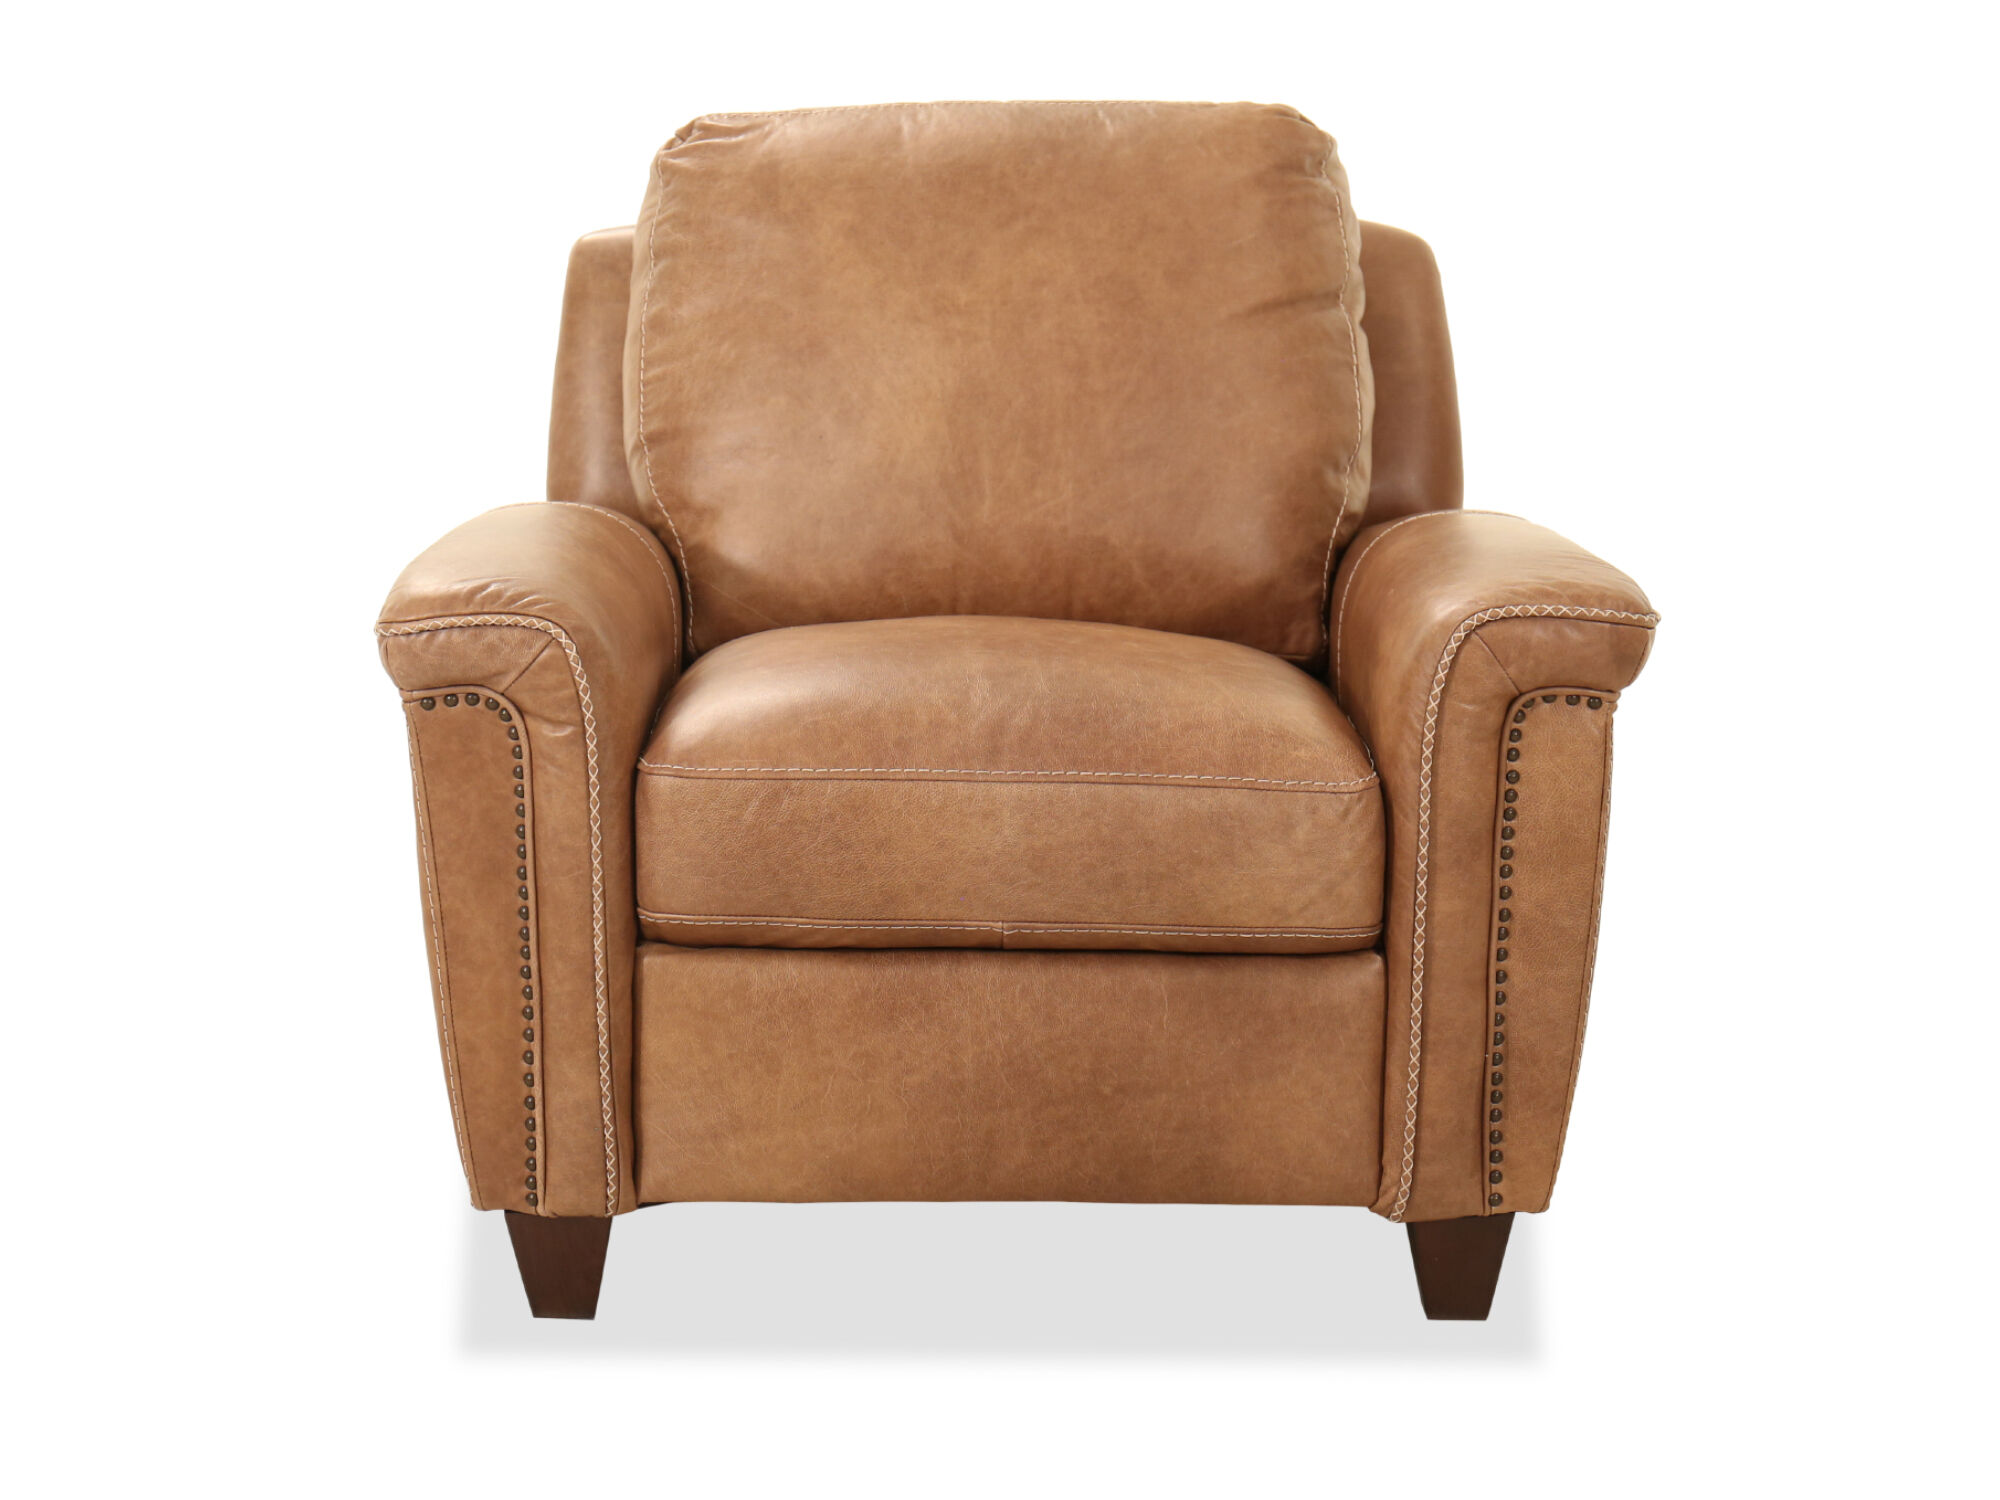 40" Nailhead Accent Leather Chair in Caramel Mathis